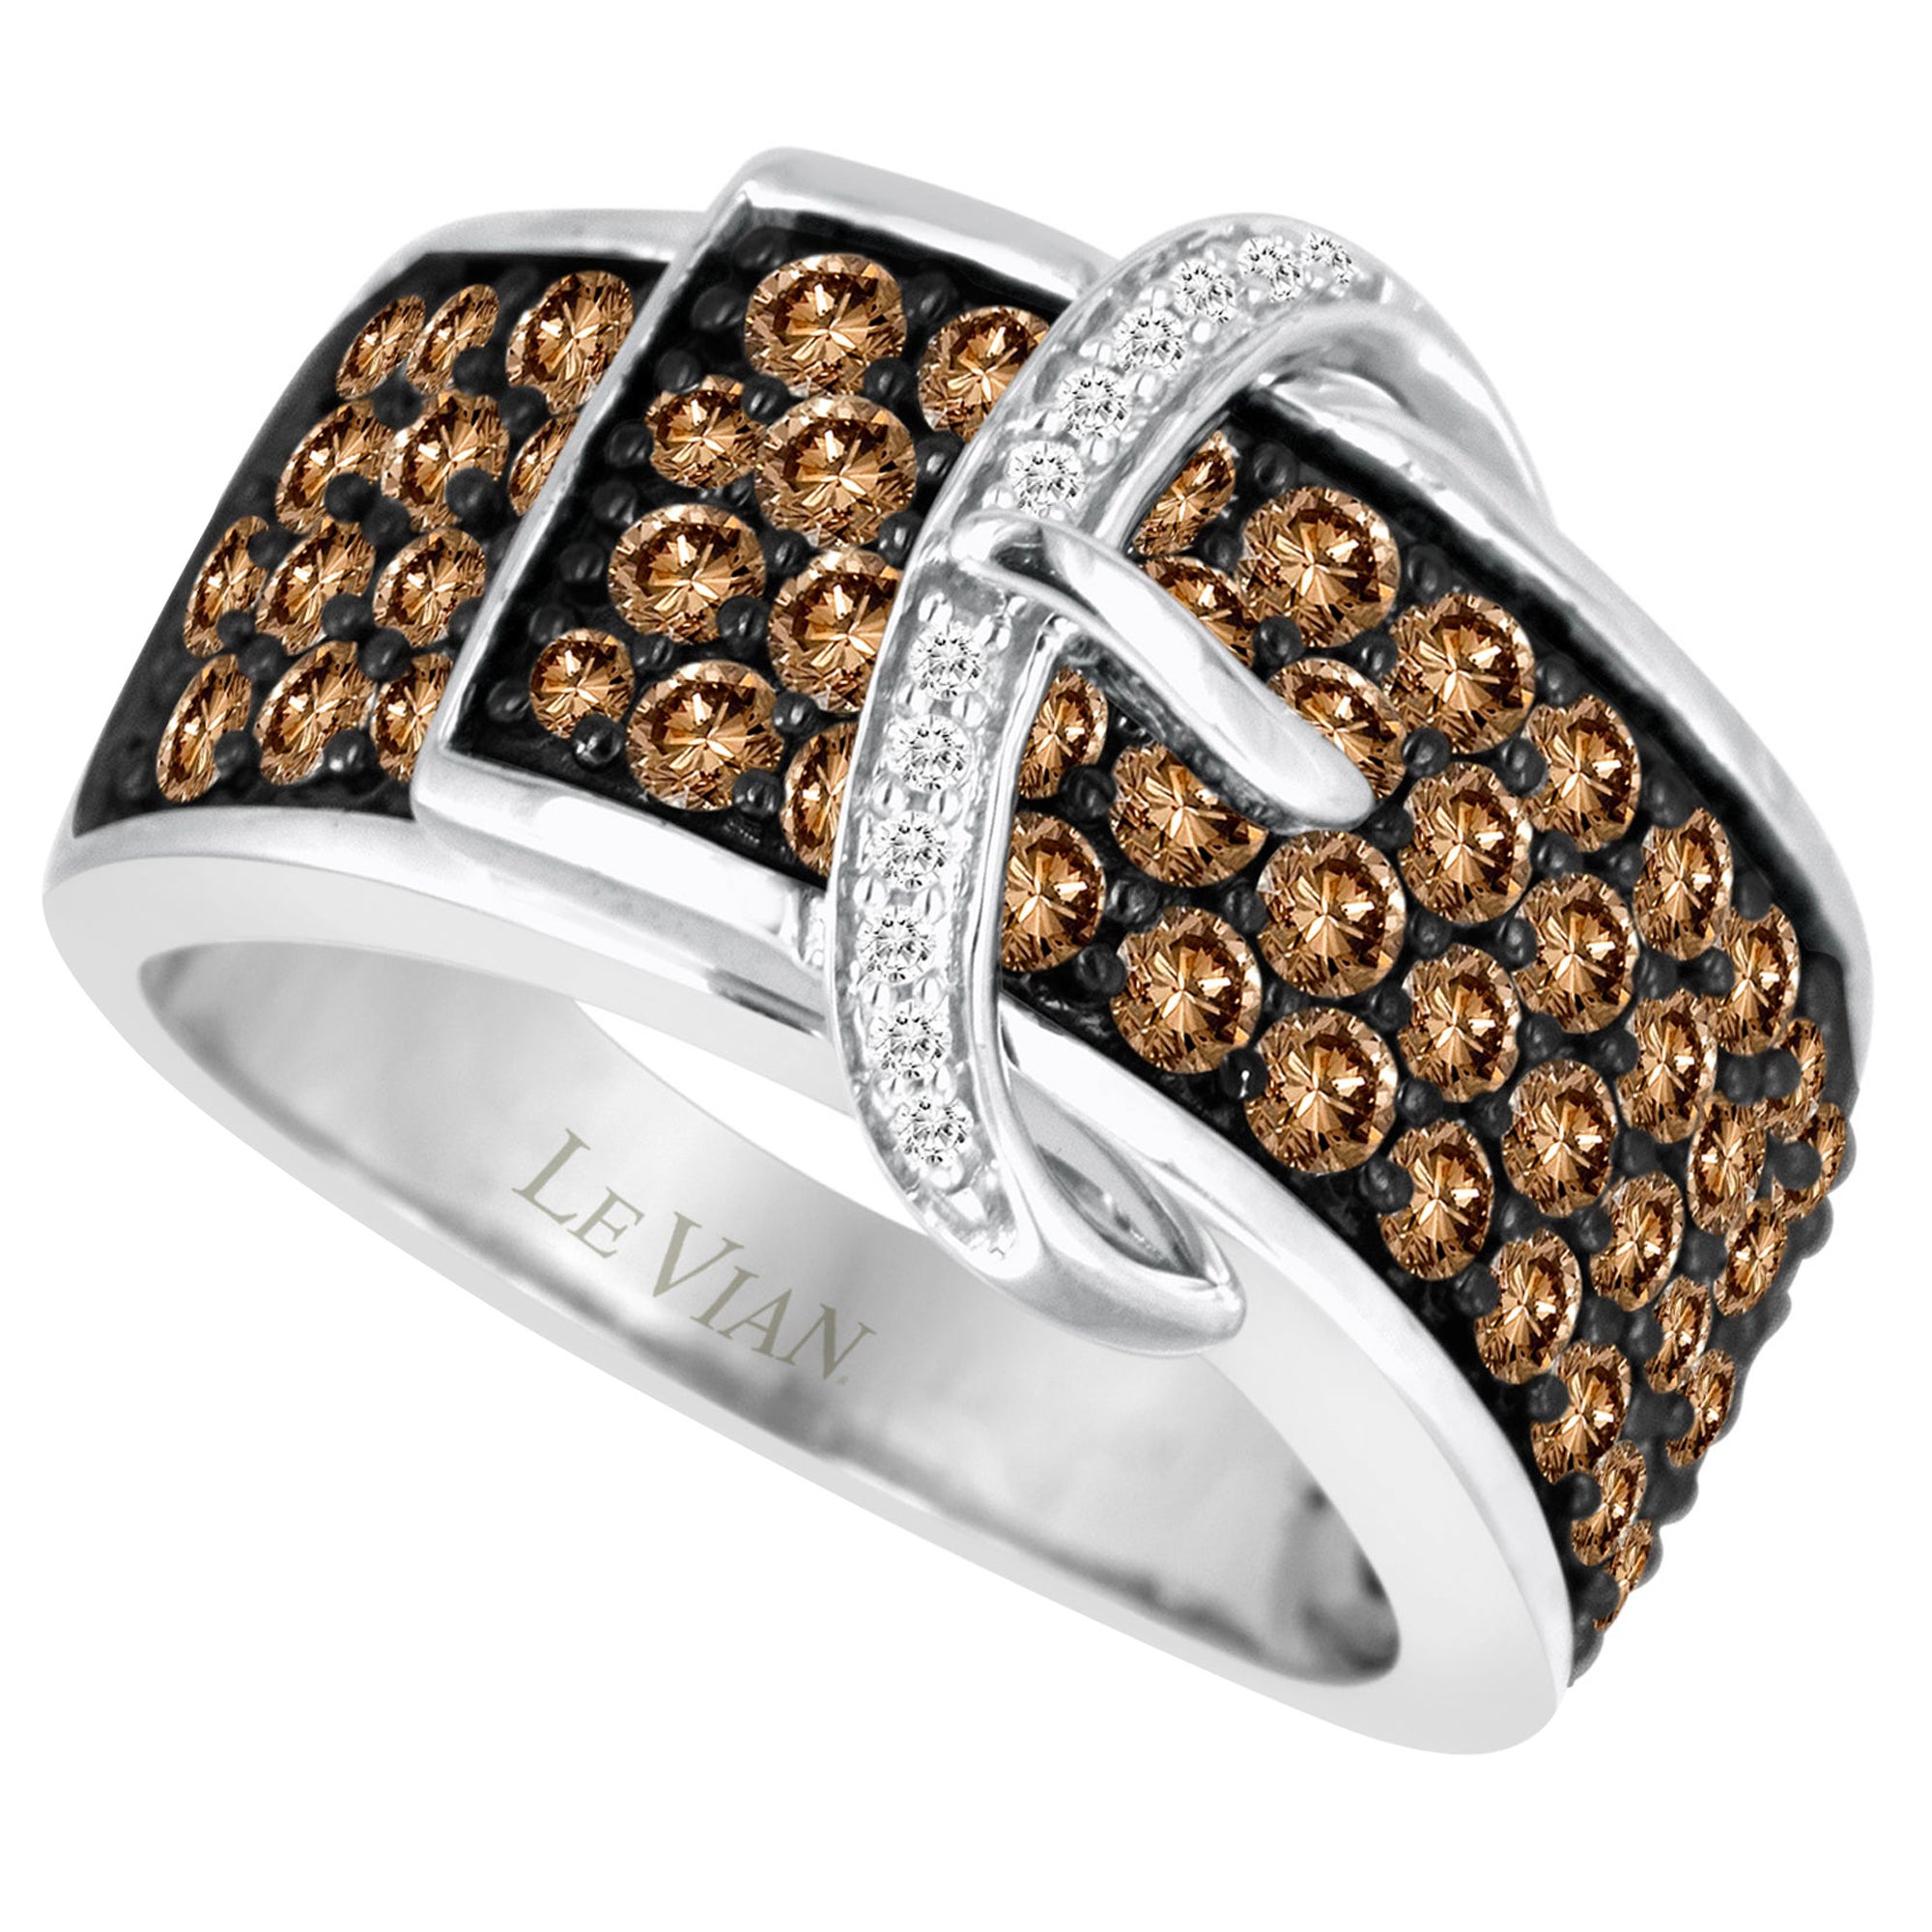 LeVian 14K White Gold Round Chocolate Brown Diamond Cluster Buckle Cocktail Ring For Sale